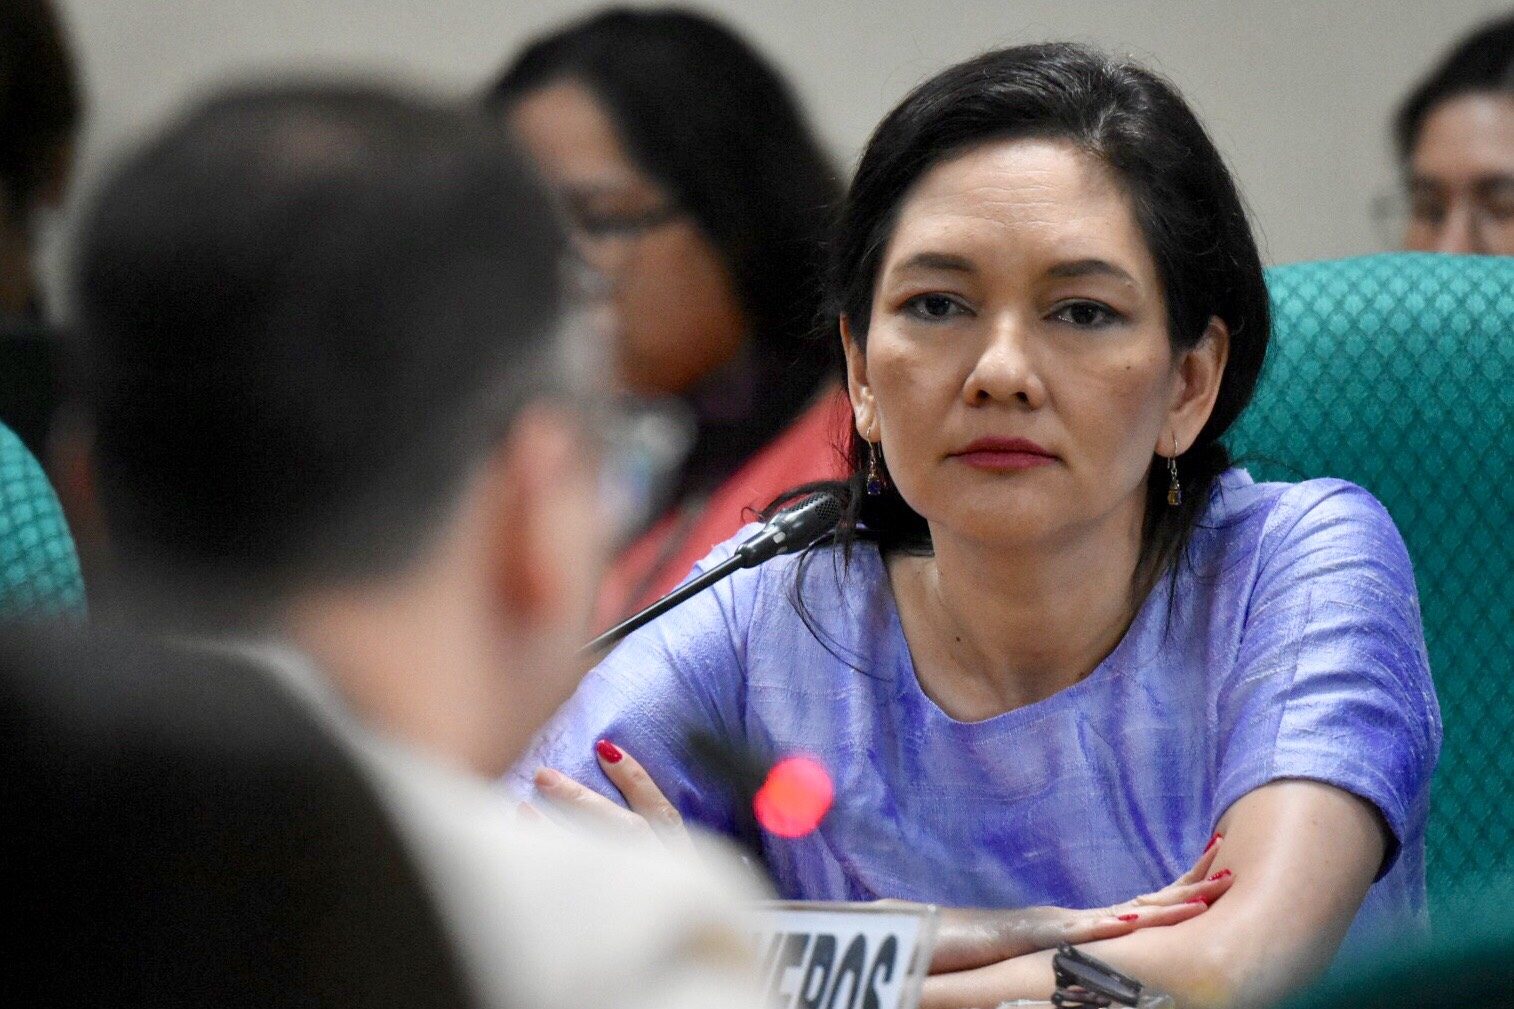 GRILLING. Senator Risa Hontiveros (right) grills Foreign Secretary Alan Peter Cayetano (left) about the West Philippine Sea, during a budget hearing at the Senate on August 28, 2018. Photo by Angie de Silva/Rappler 